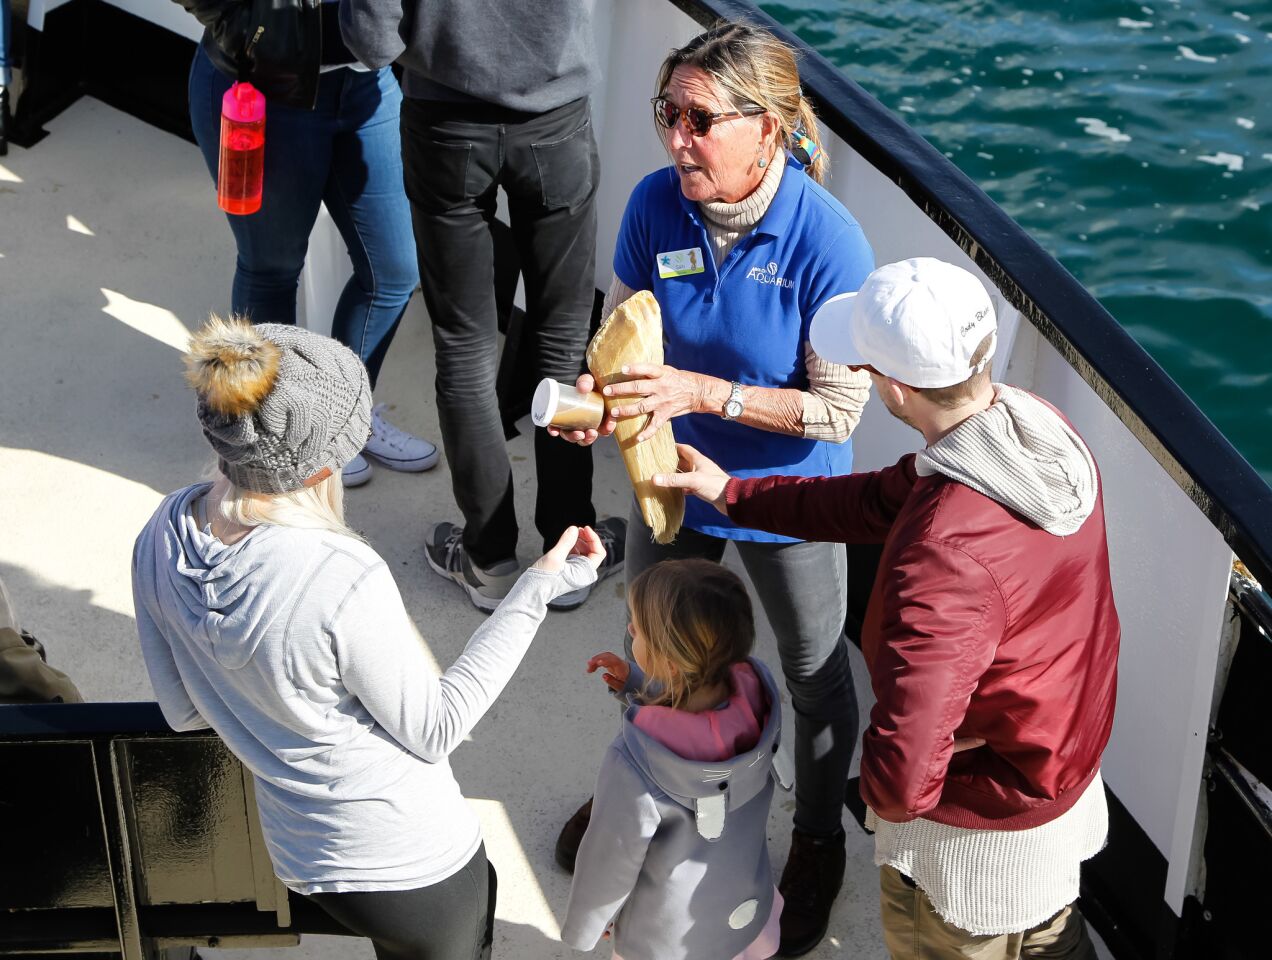 Volunteer Sally Beach shows baleen and from a gray whale to passengers aboard the Marietta after returning from a whale watching tour presented by Birch Aquarium and Flagship Cruises.